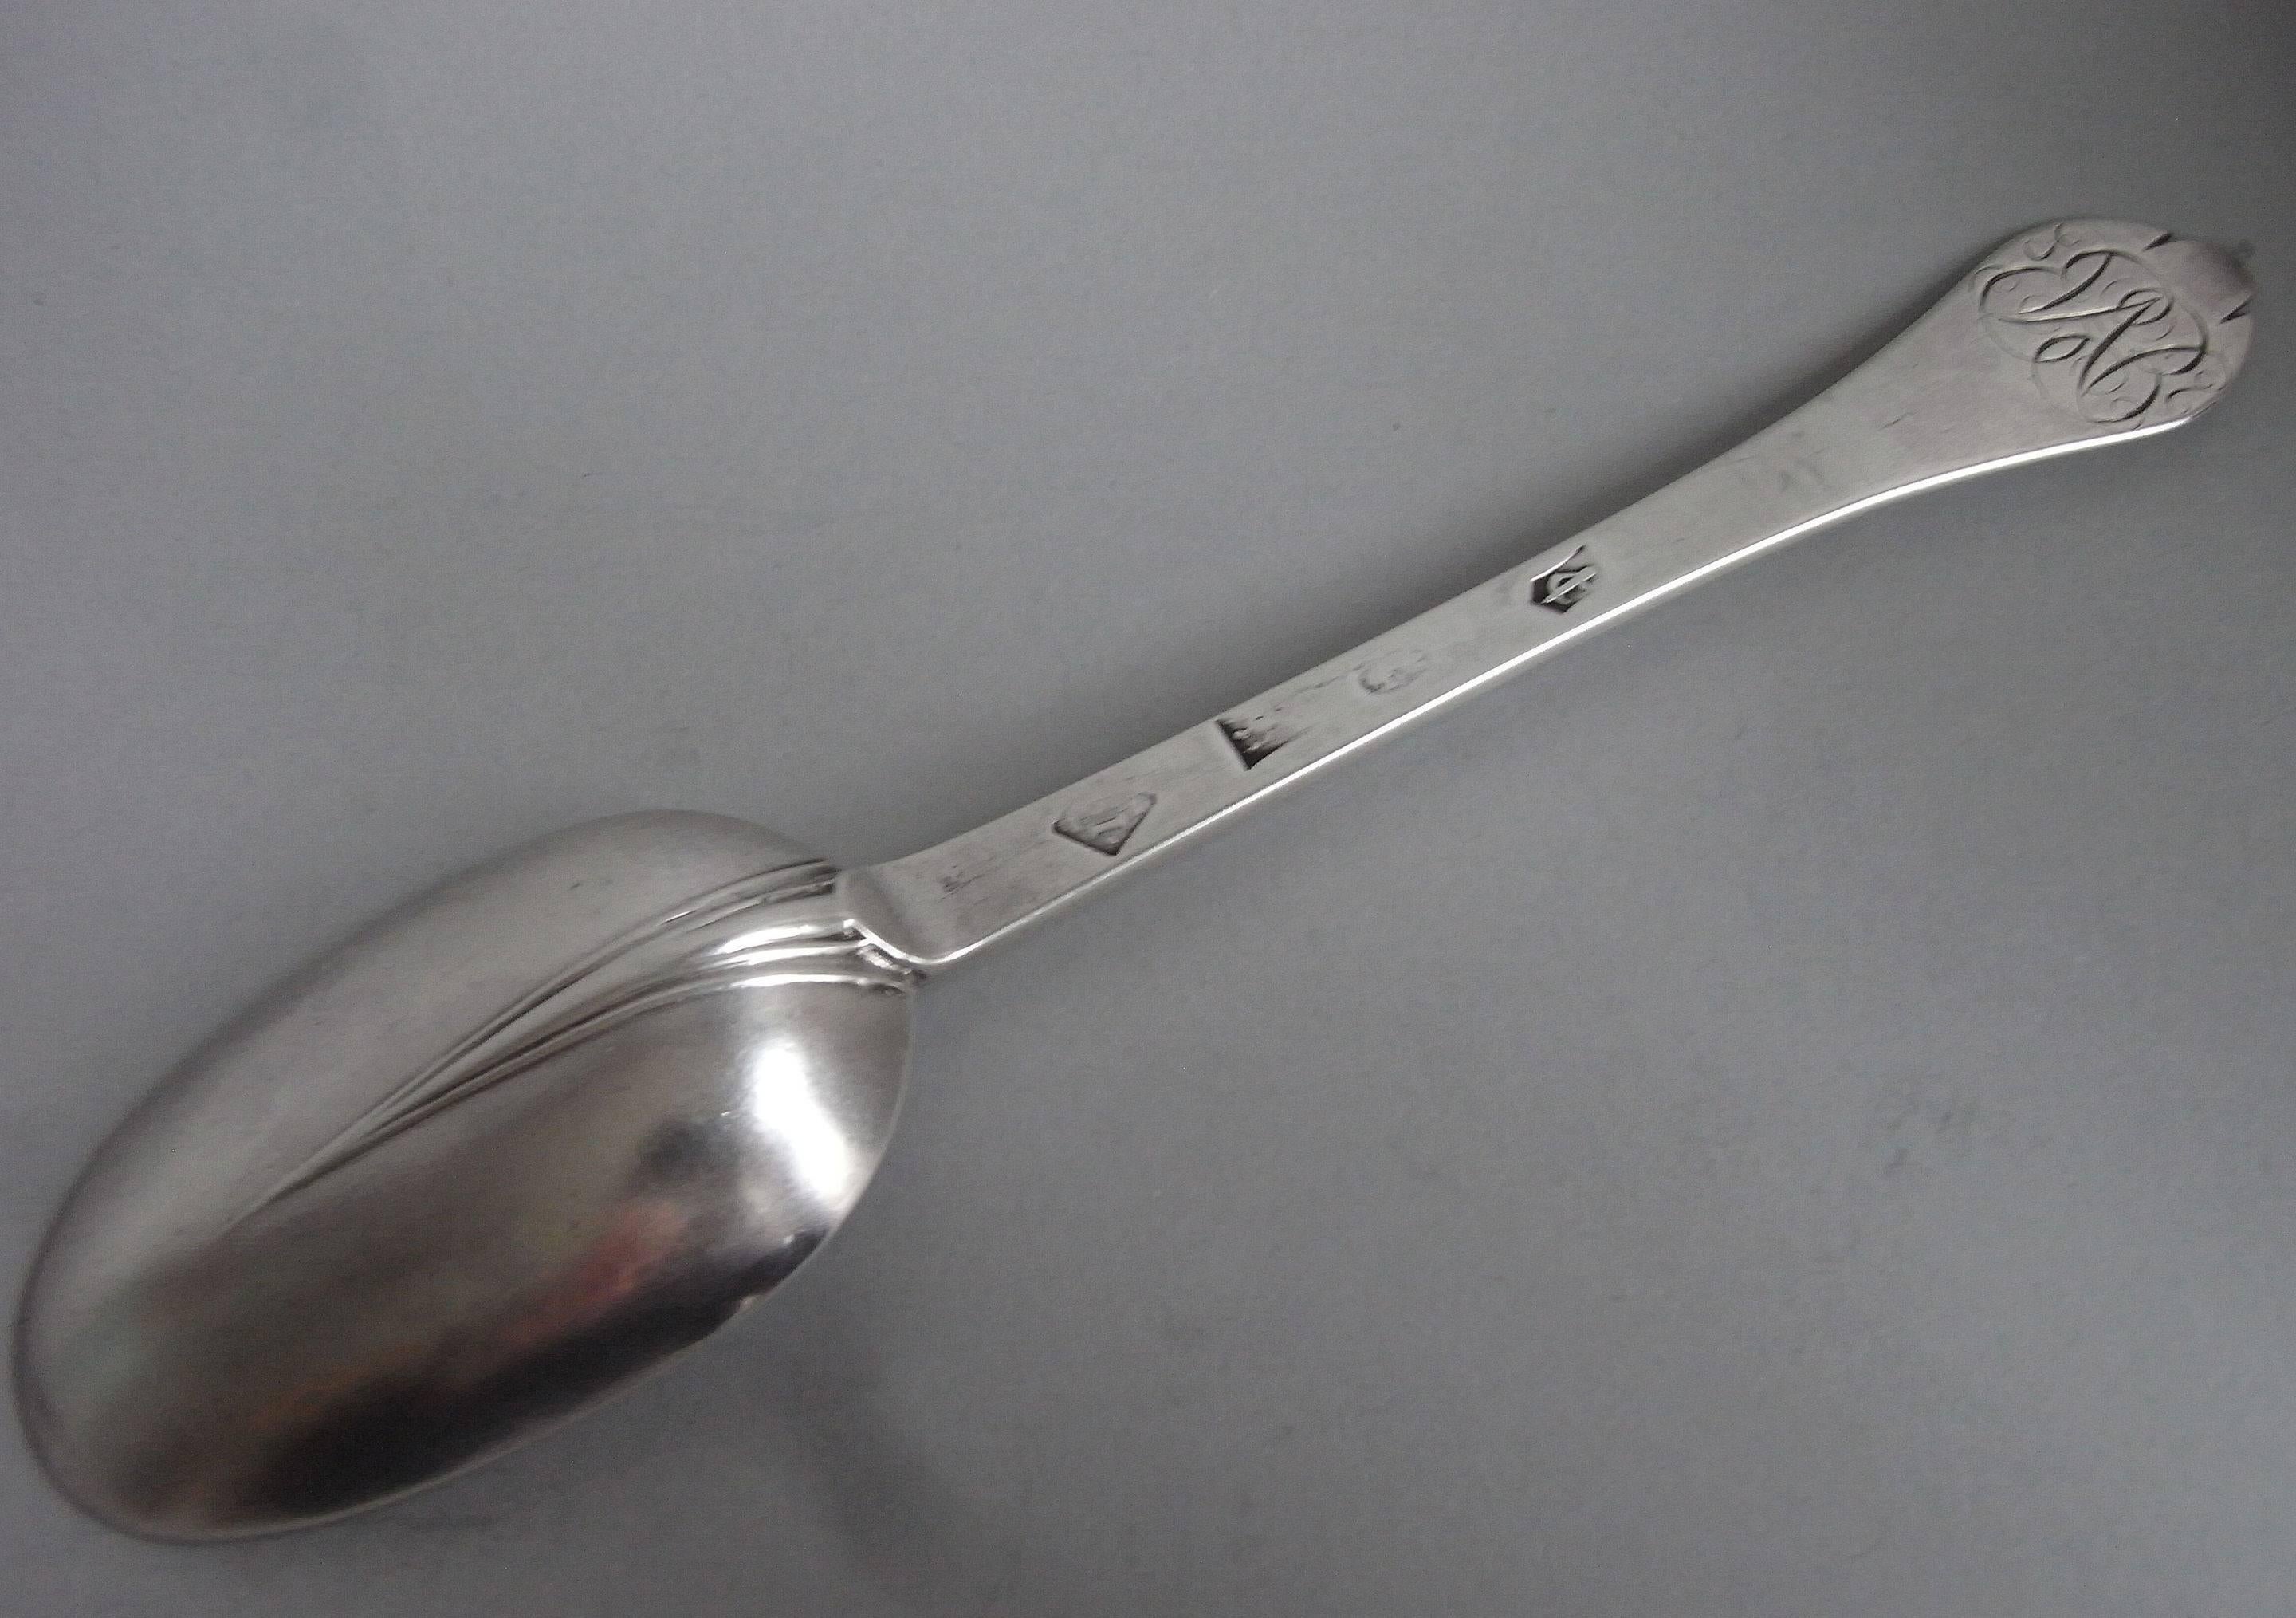 These exceptionally rare spoons are modeled in the Trefid style and display a reeded rat tail on the back of the bowl. The top of the stem is engraved with a beautifully designed mirror cipher, which was typical of this date. The spoons are in